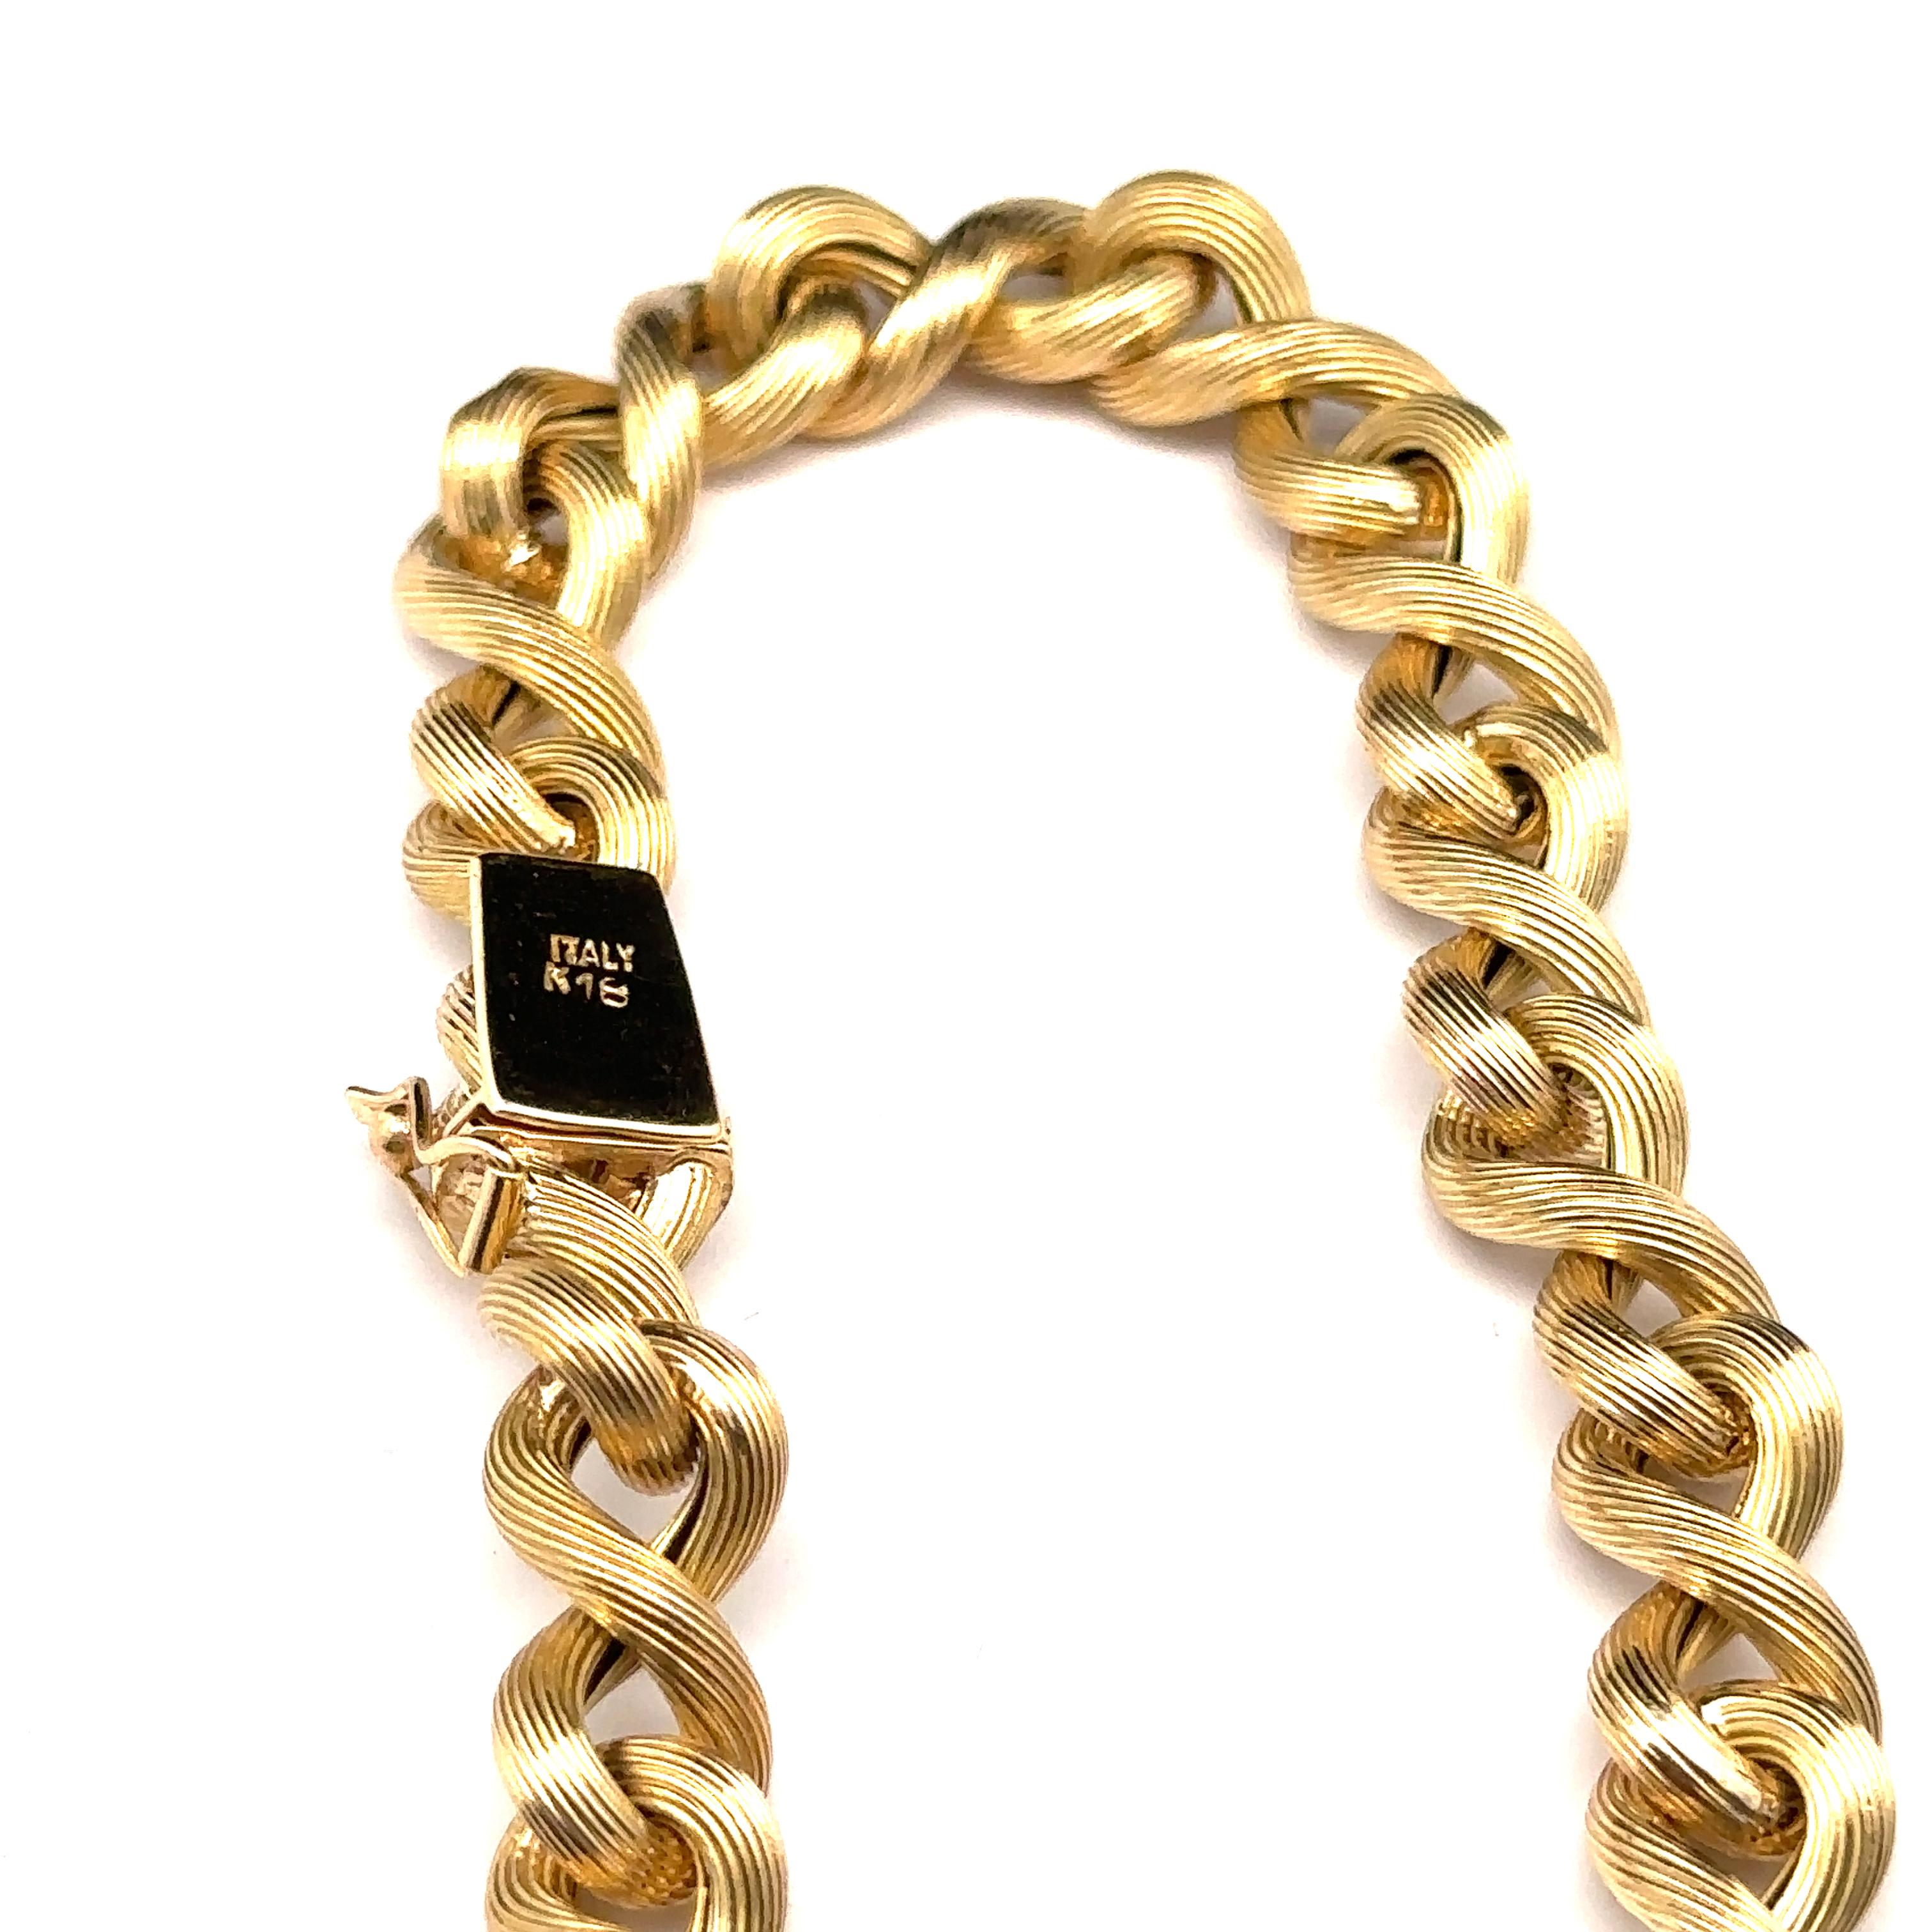 Vintage Italian 18k Yellow Gold Textured Puffed Figure 8 Link Chain Bracelet For Sale 1